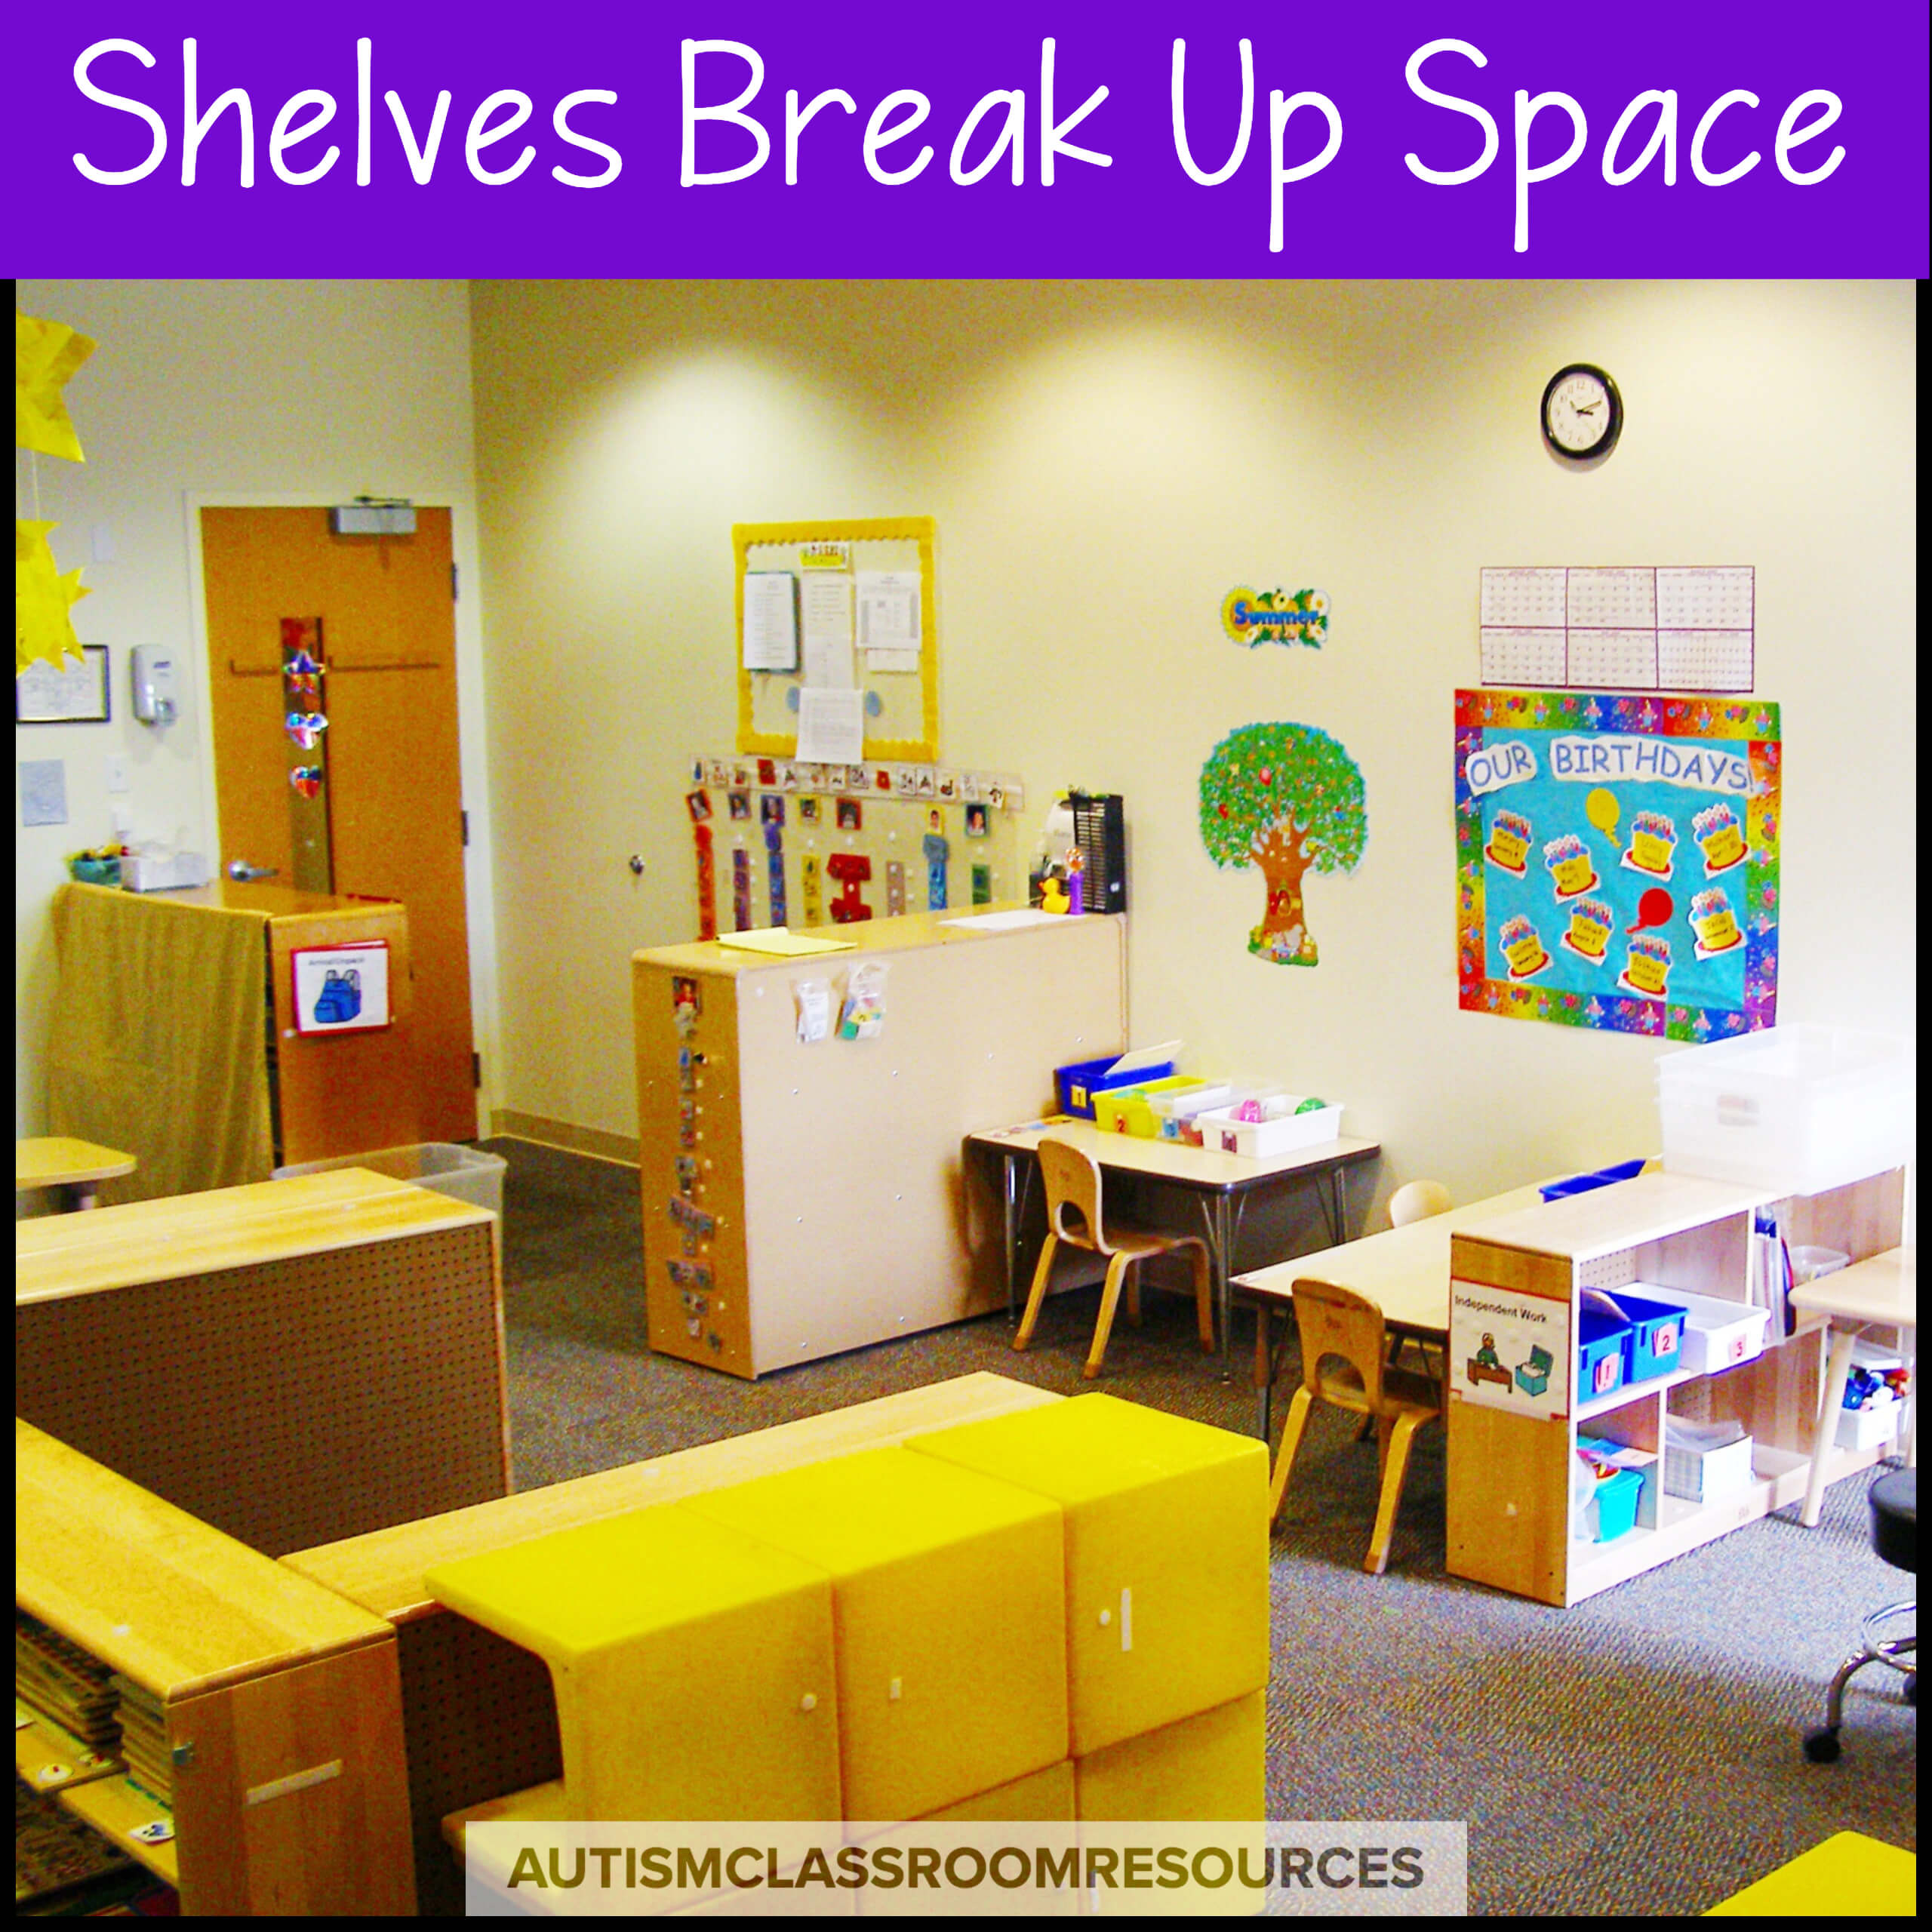 What if addressing challenging behavior in your classroom could be as simple as making changes to your room design? Here are some simple tricks that can help you prevent or address behaviors with their warning signs and solutions. #roomdesign #specialeducation